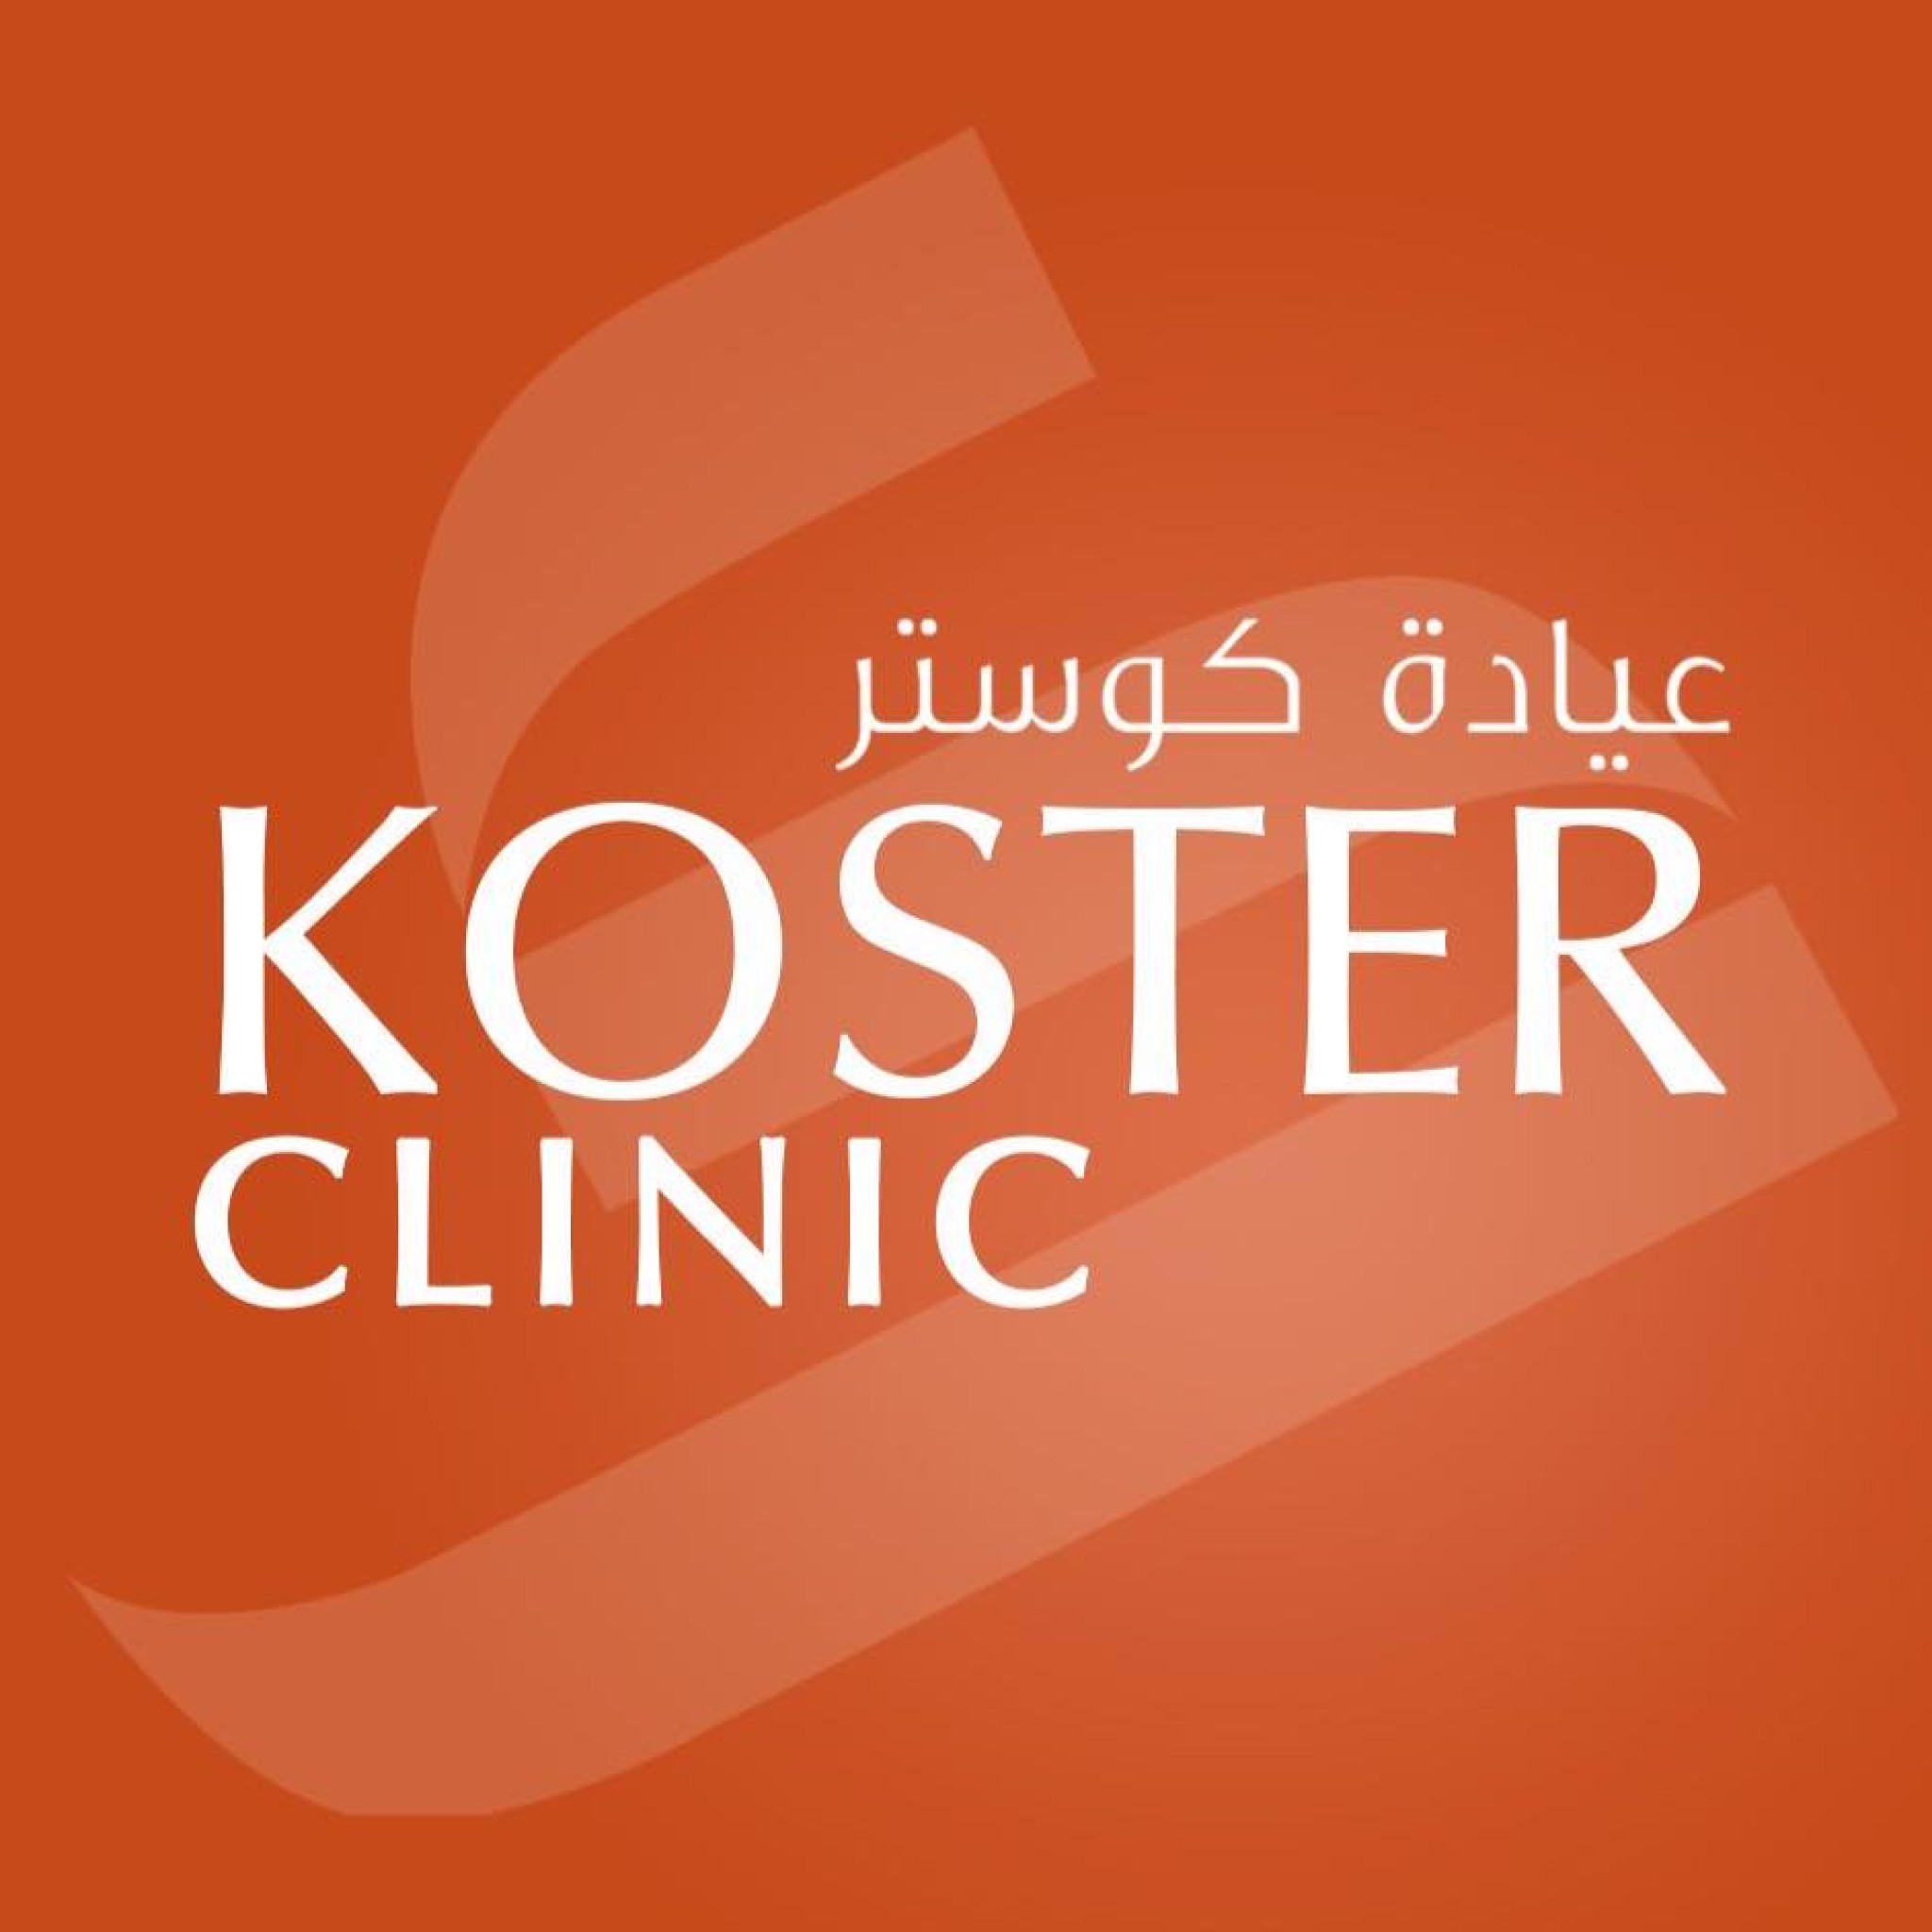 Koster Clinic